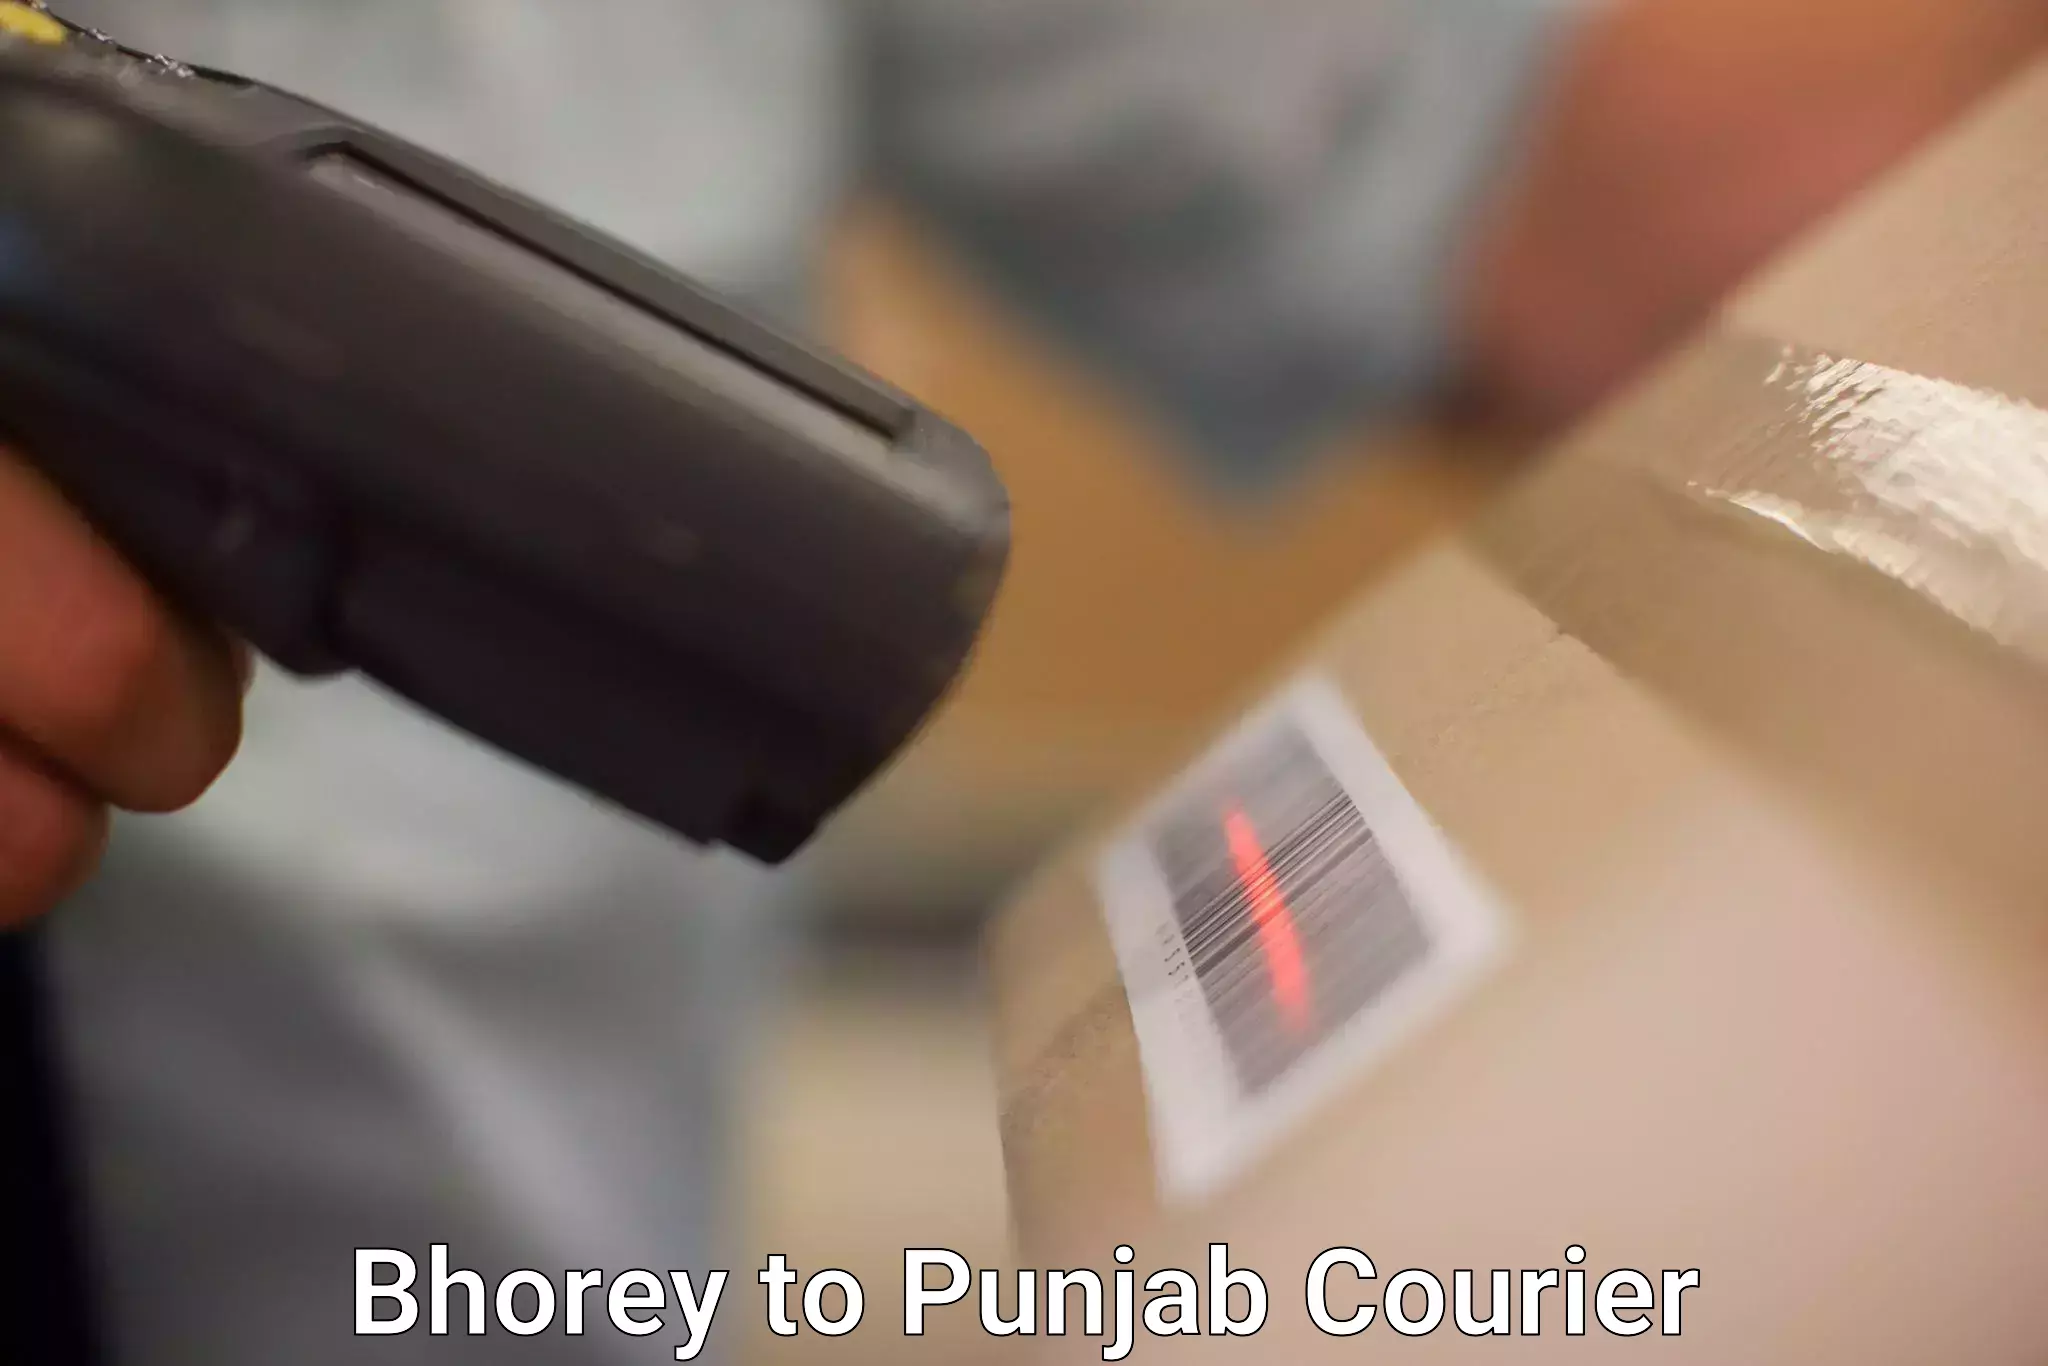 Same-day delivery solutions Bhorey to Punjab